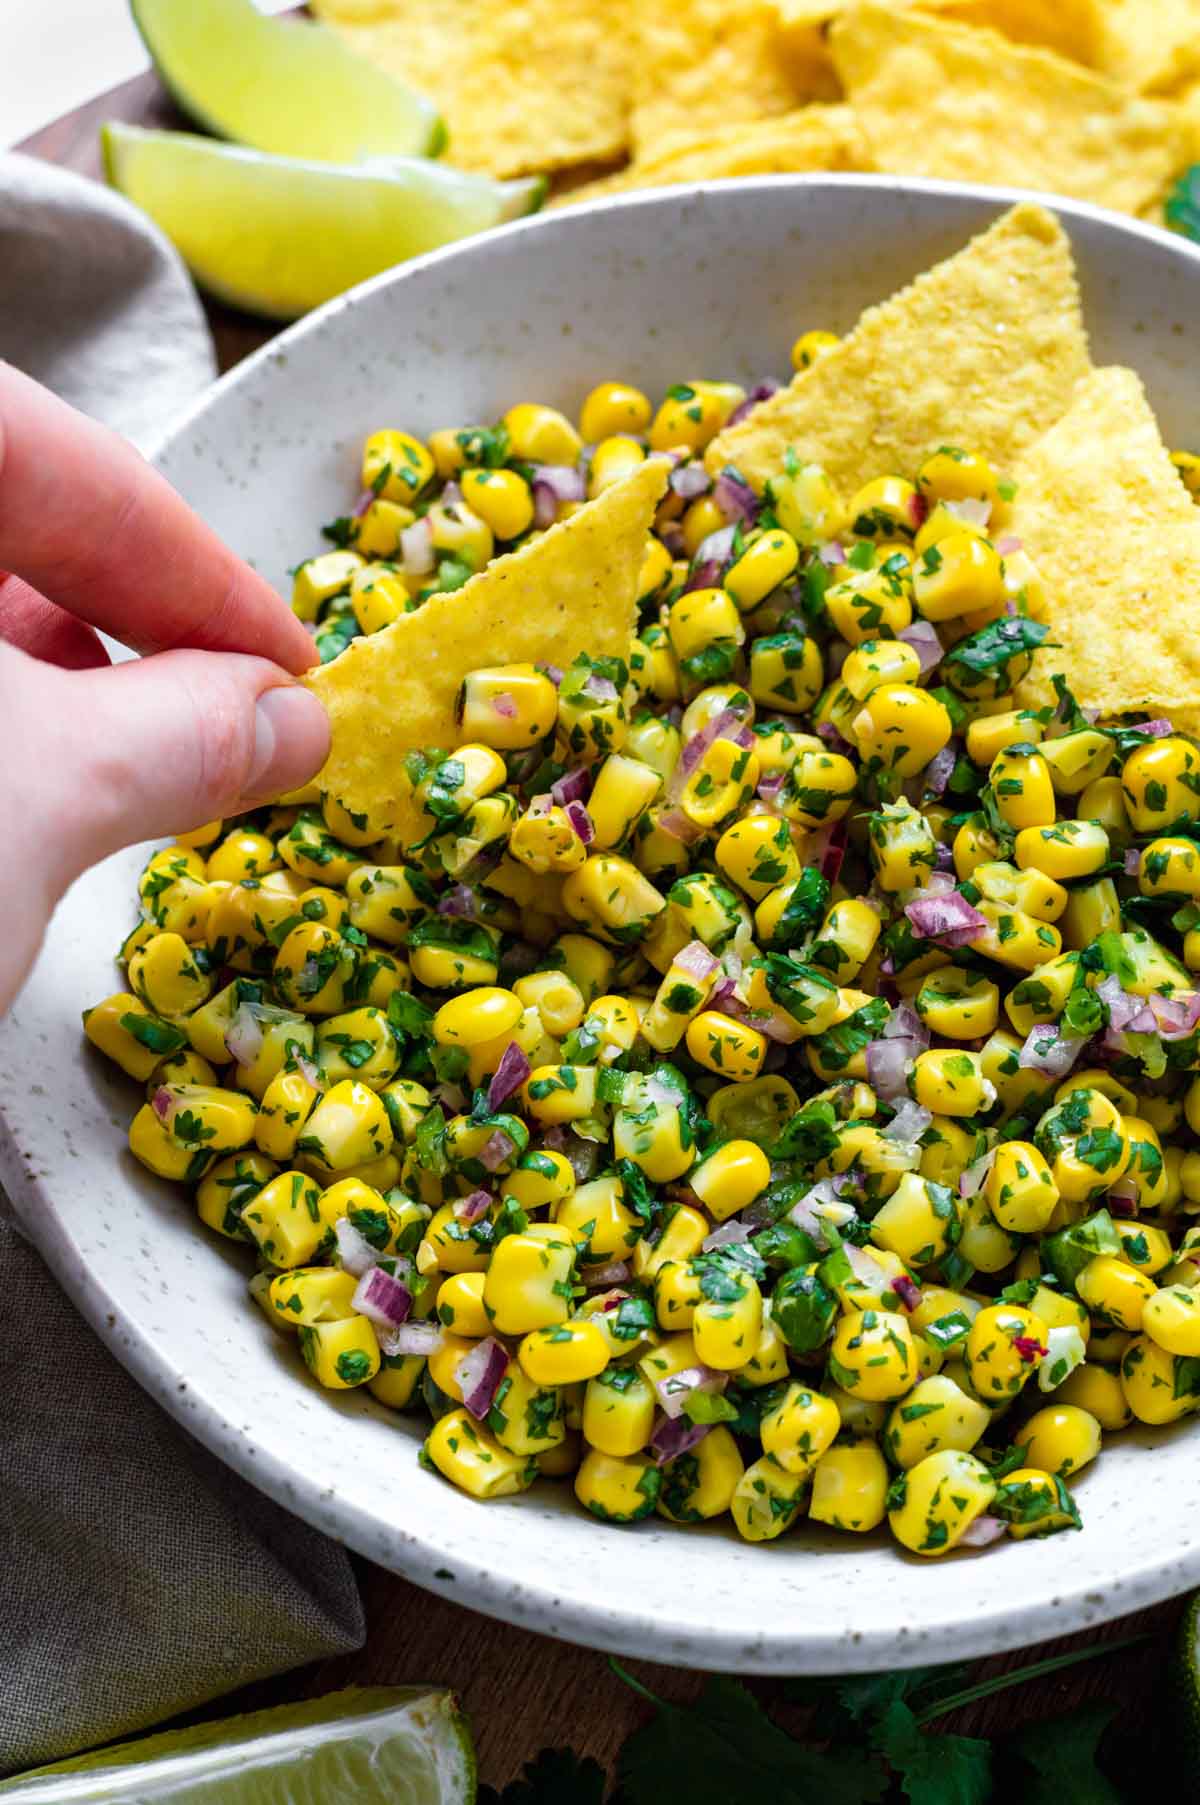 A hand holding a single tortilla chip and dipping it into a white bowl filled with corn salsa.